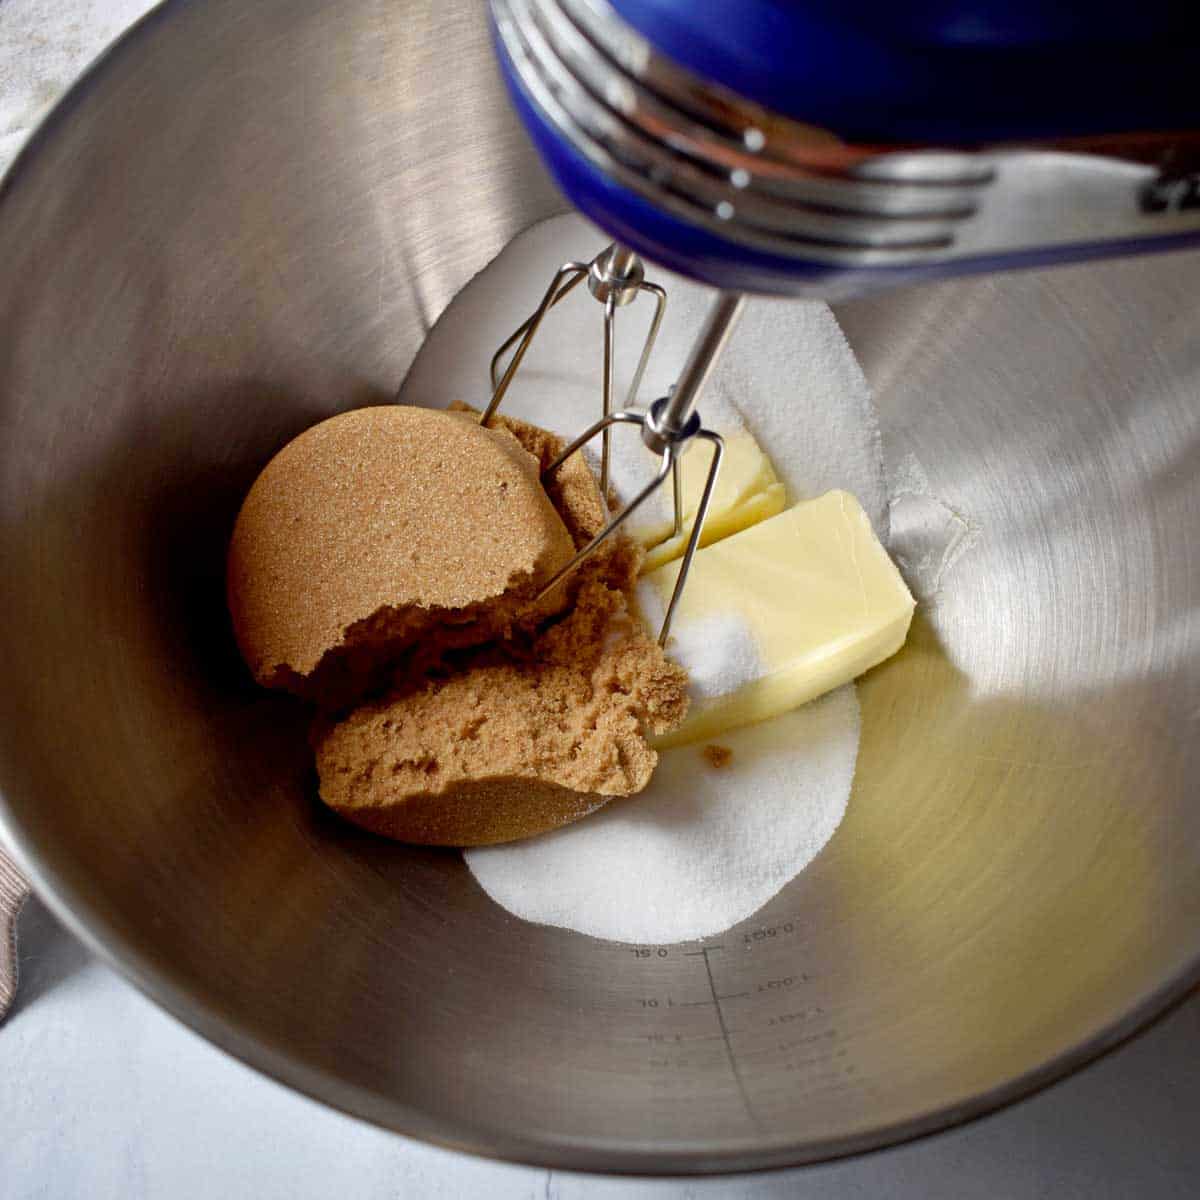 Sugars and butter being mixed together in a large metal mixing bowl.